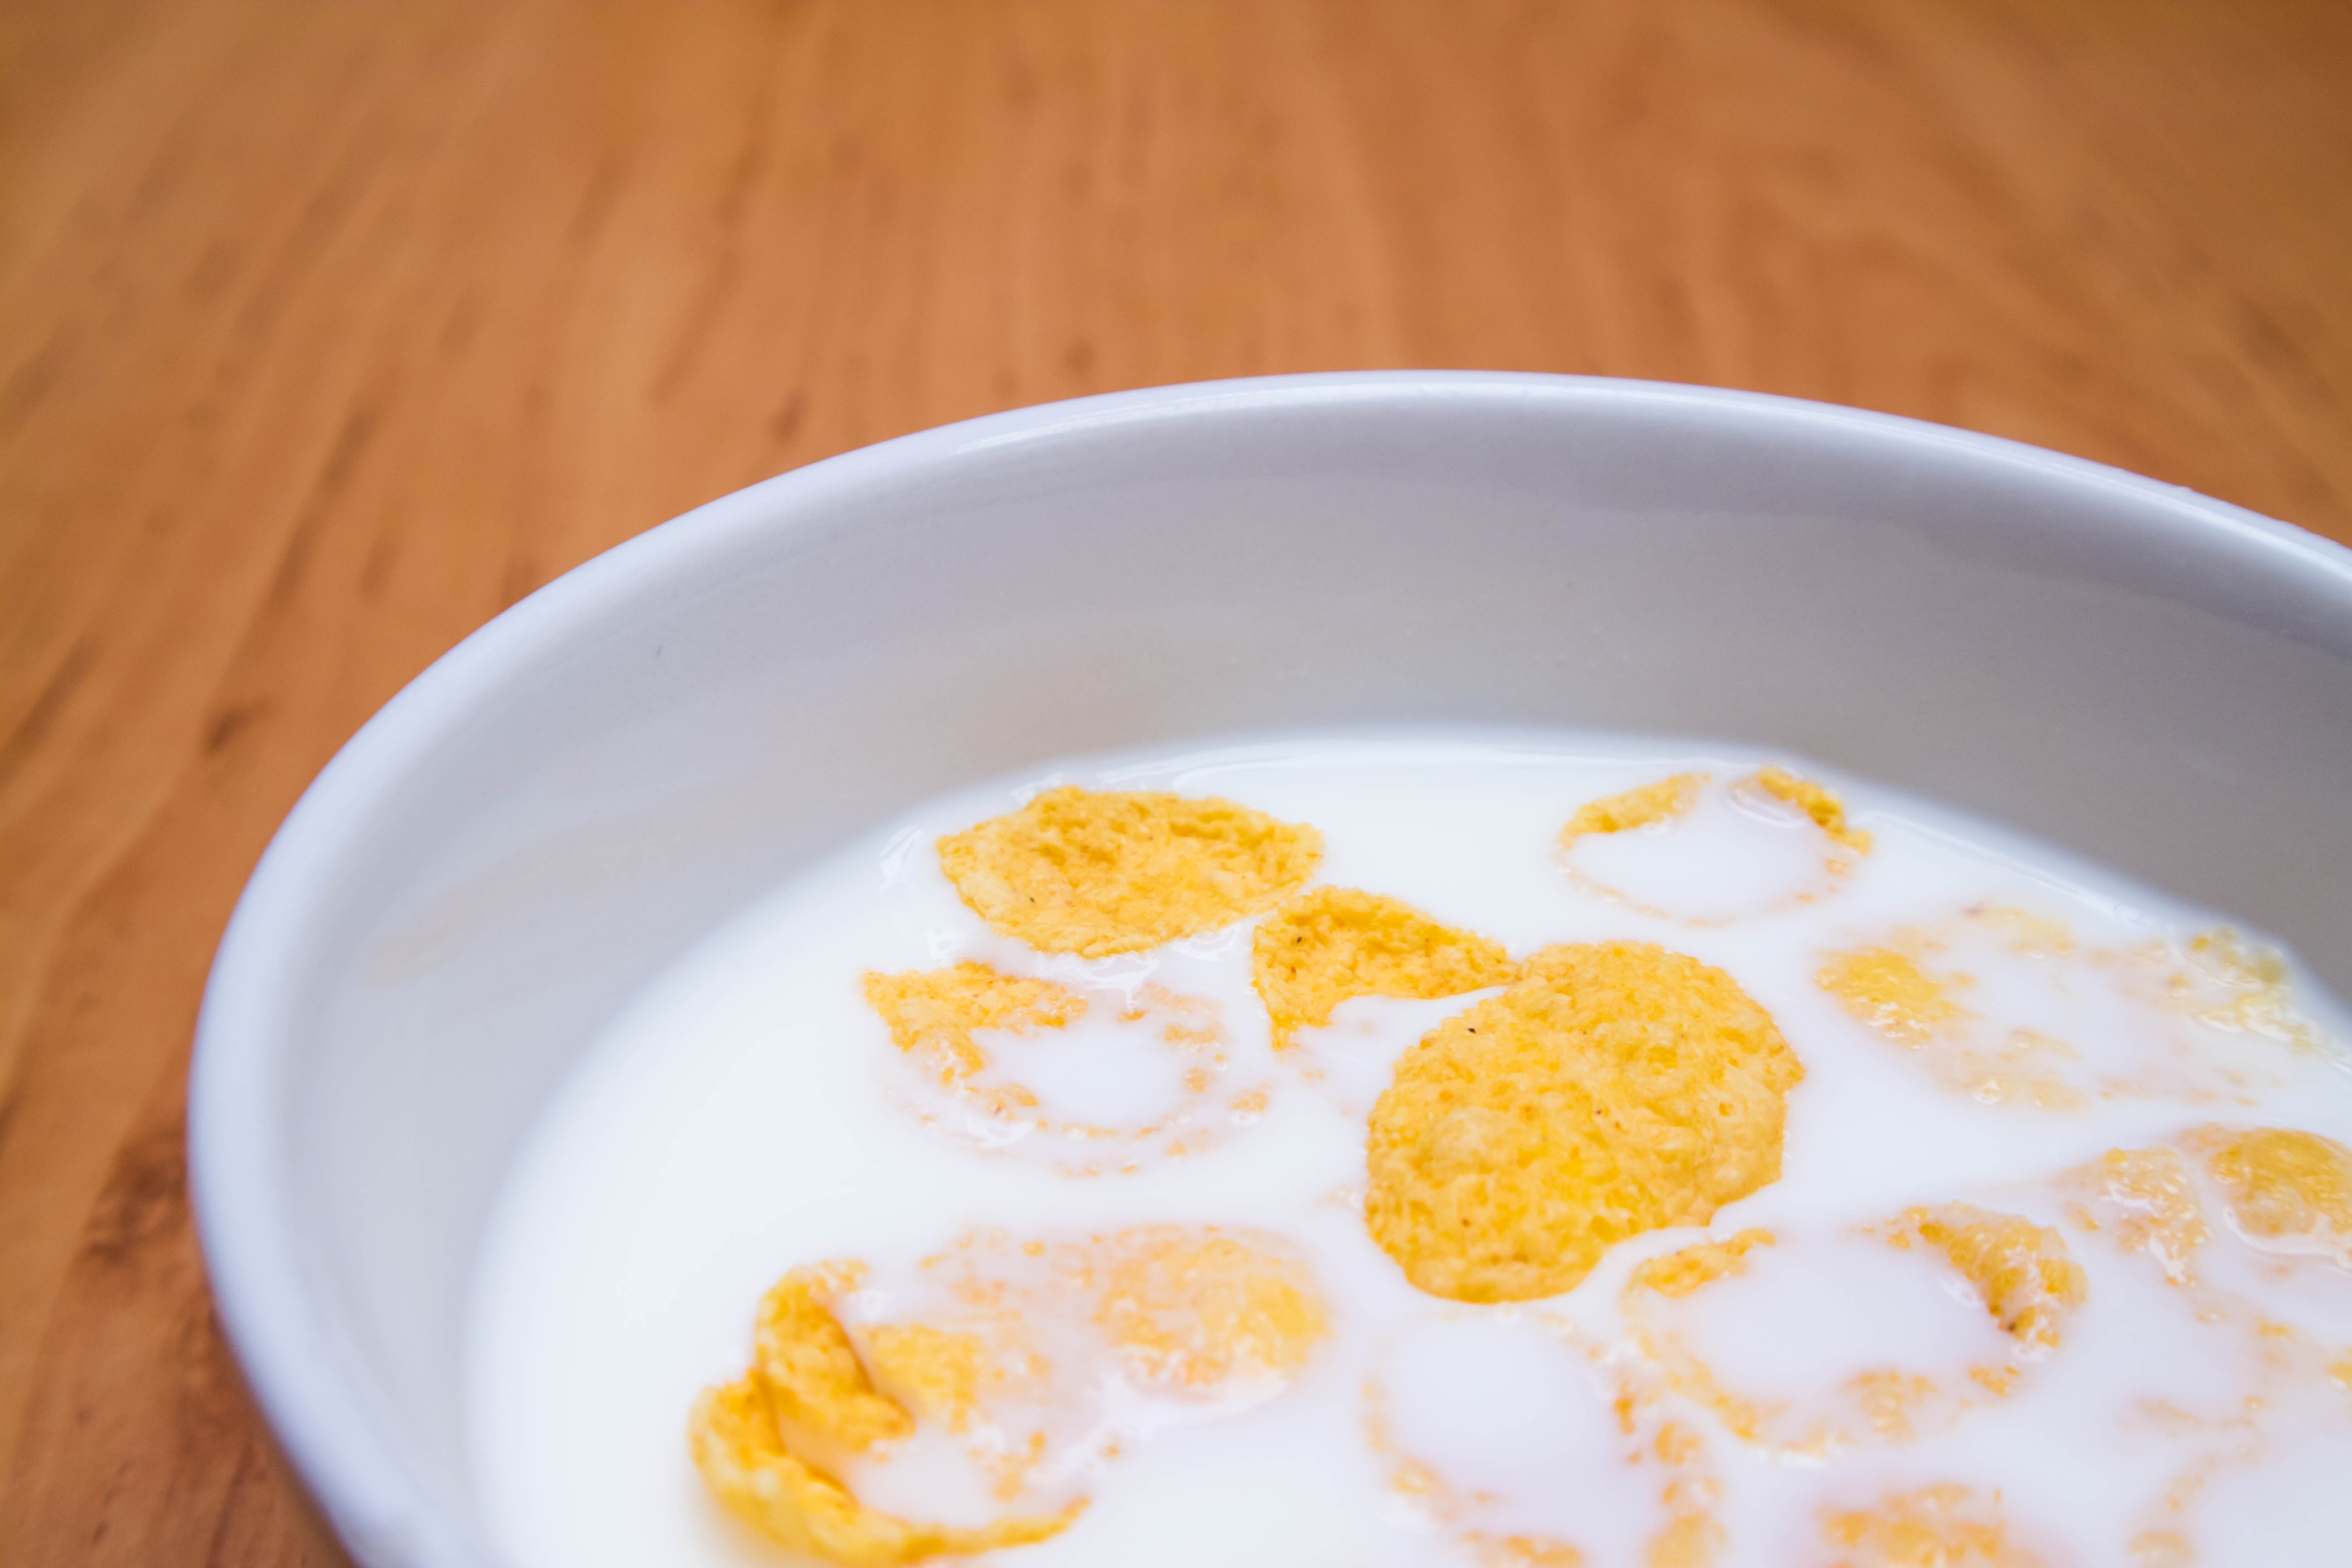 Is cereal healthy? Here's why cereal makes you sleepy — and you